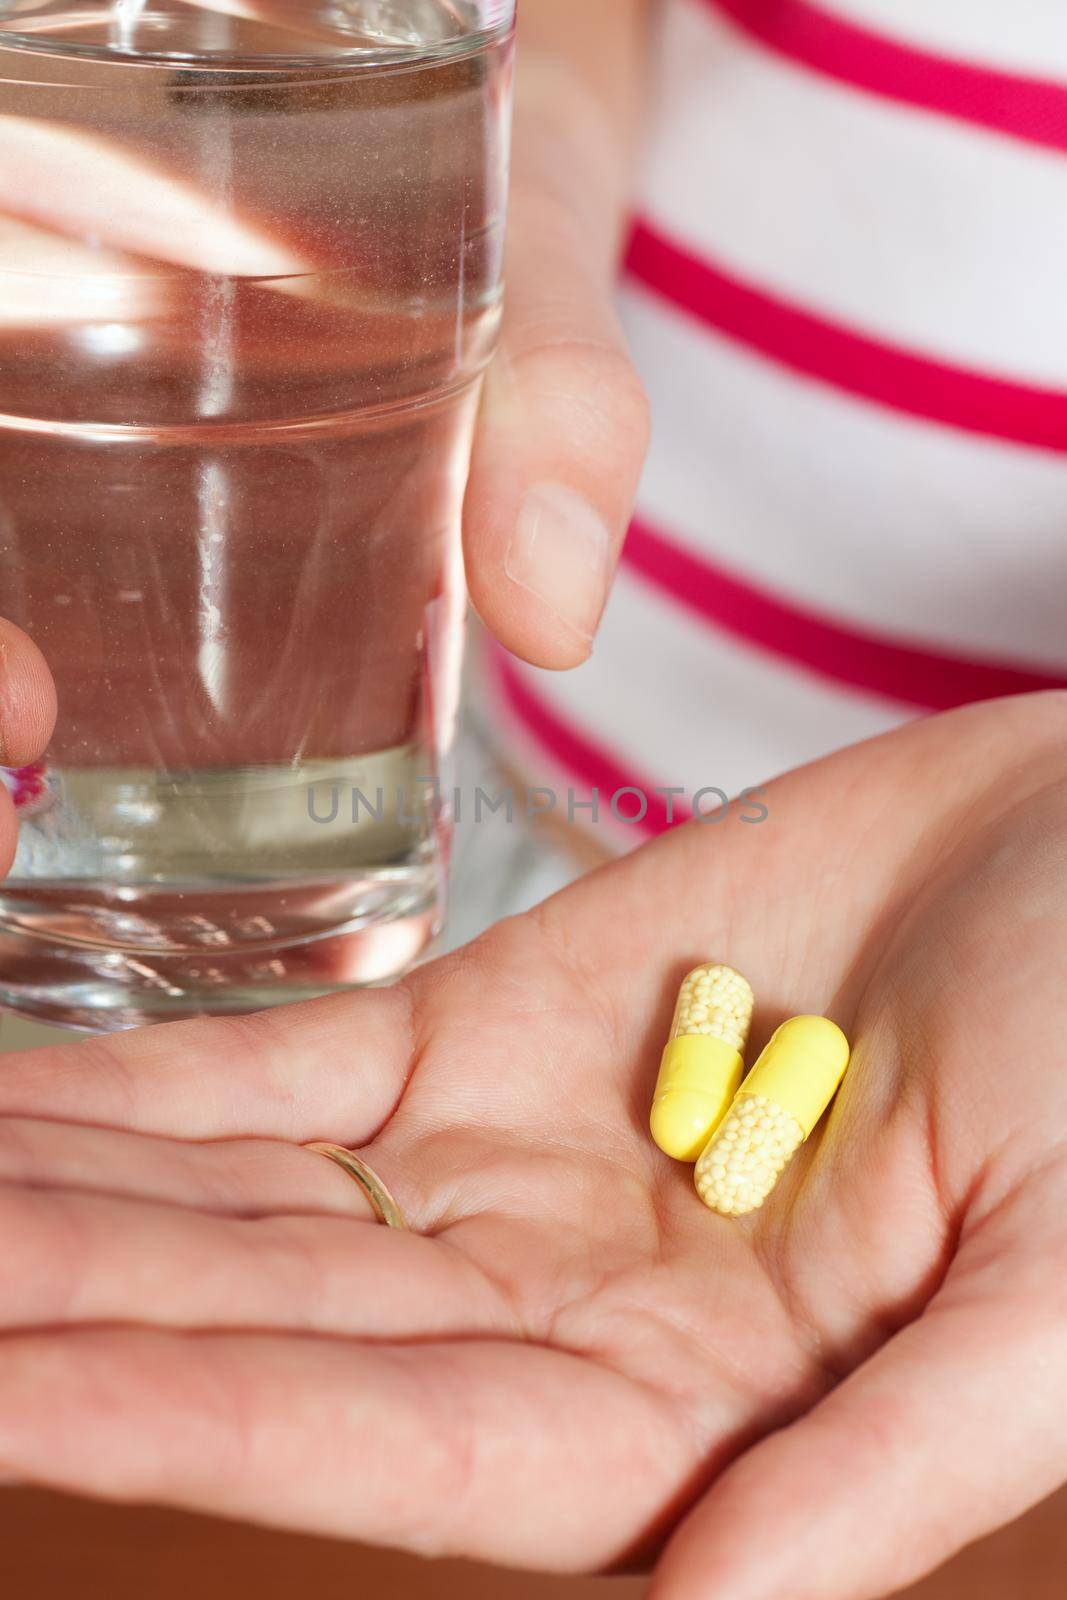 Woman holding pharmaceutical pills and a glass of water in her hand